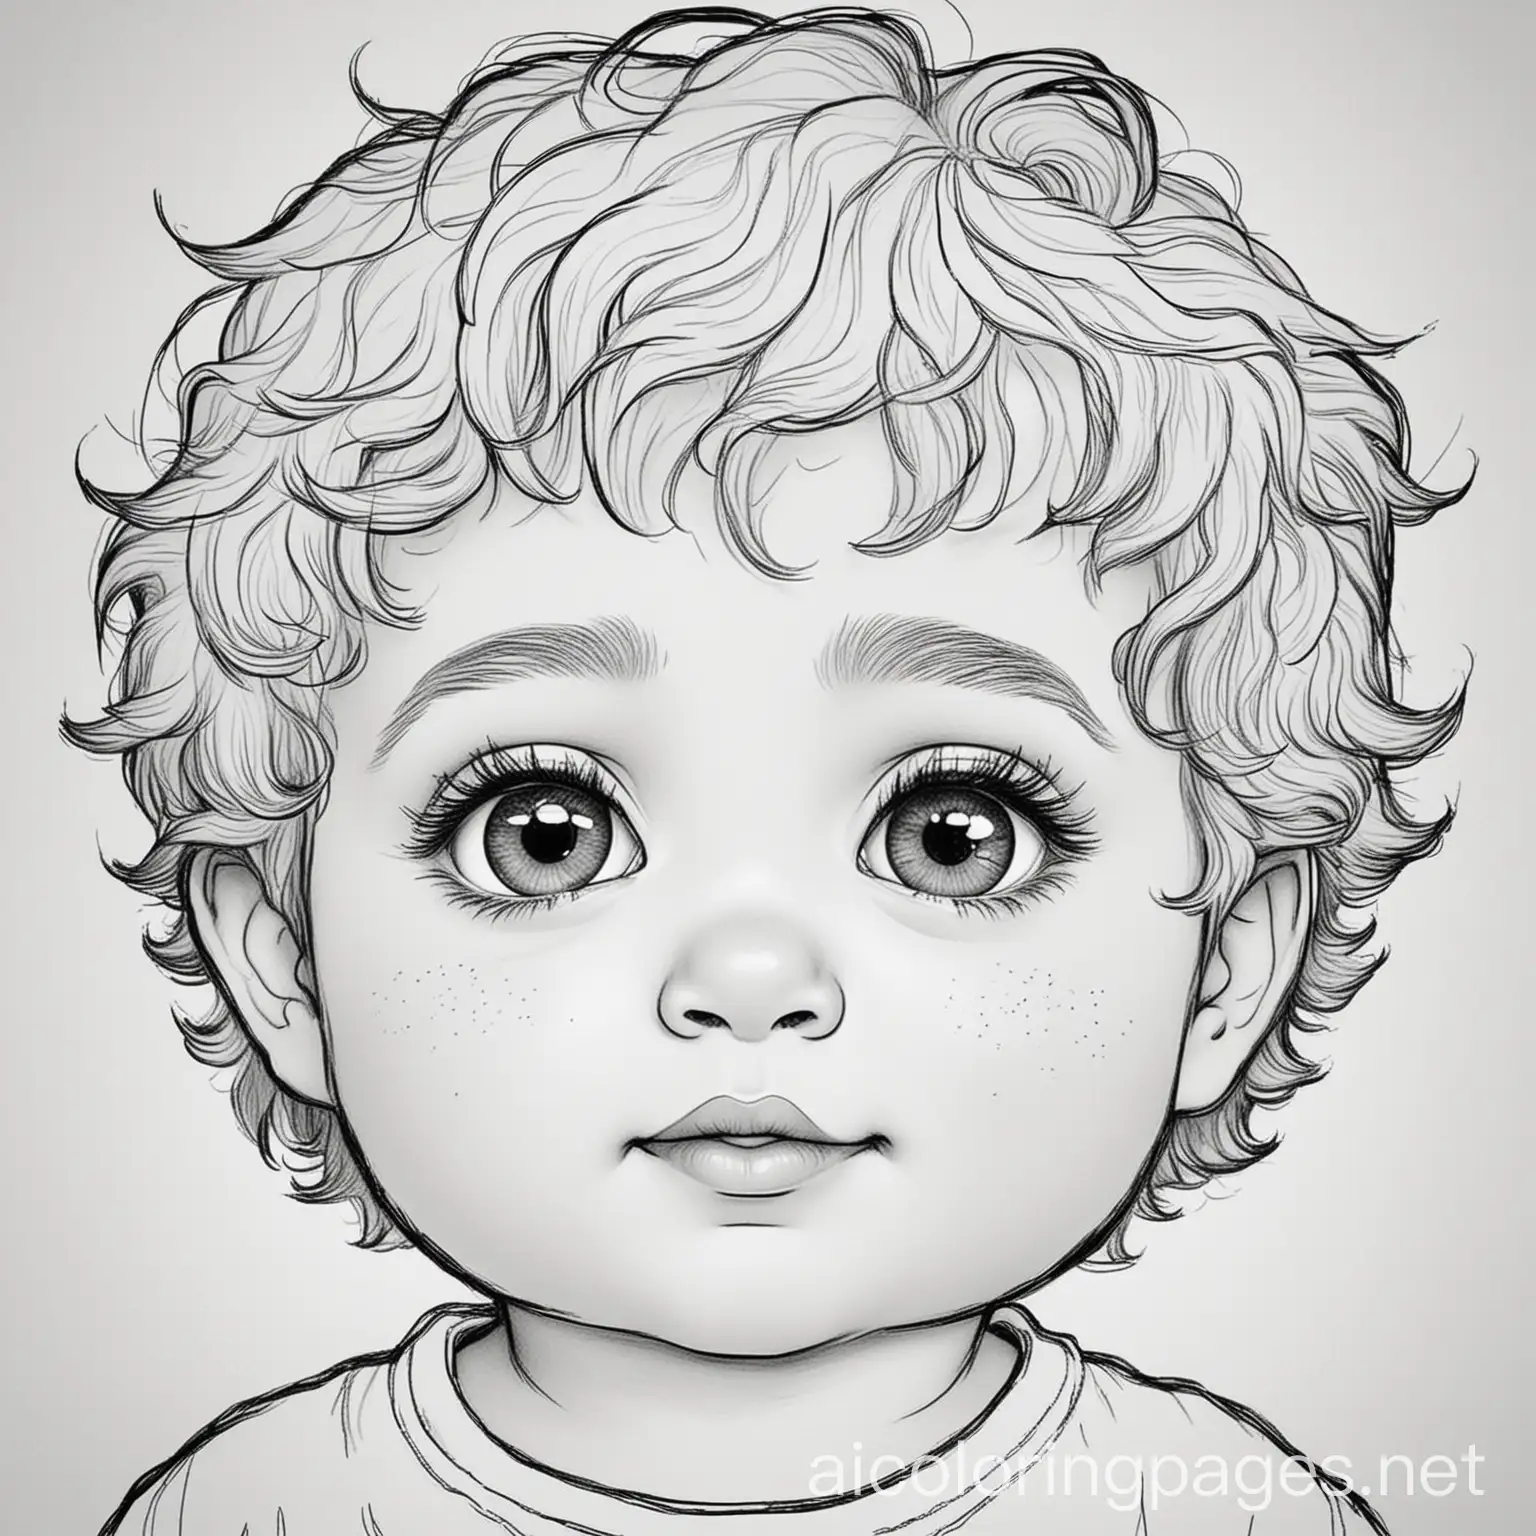 Baby boy twins with wavy hair and big eyes, and a chubby face
, Coloring Page, black and white, line art, white background, Simplicity, Ample White Space. The background of the coloring page is plain white to make it easy for young children to color within the lines. The outlines of all the subjects are easy to distinguish, making it simple for kids to color without too much difficulty